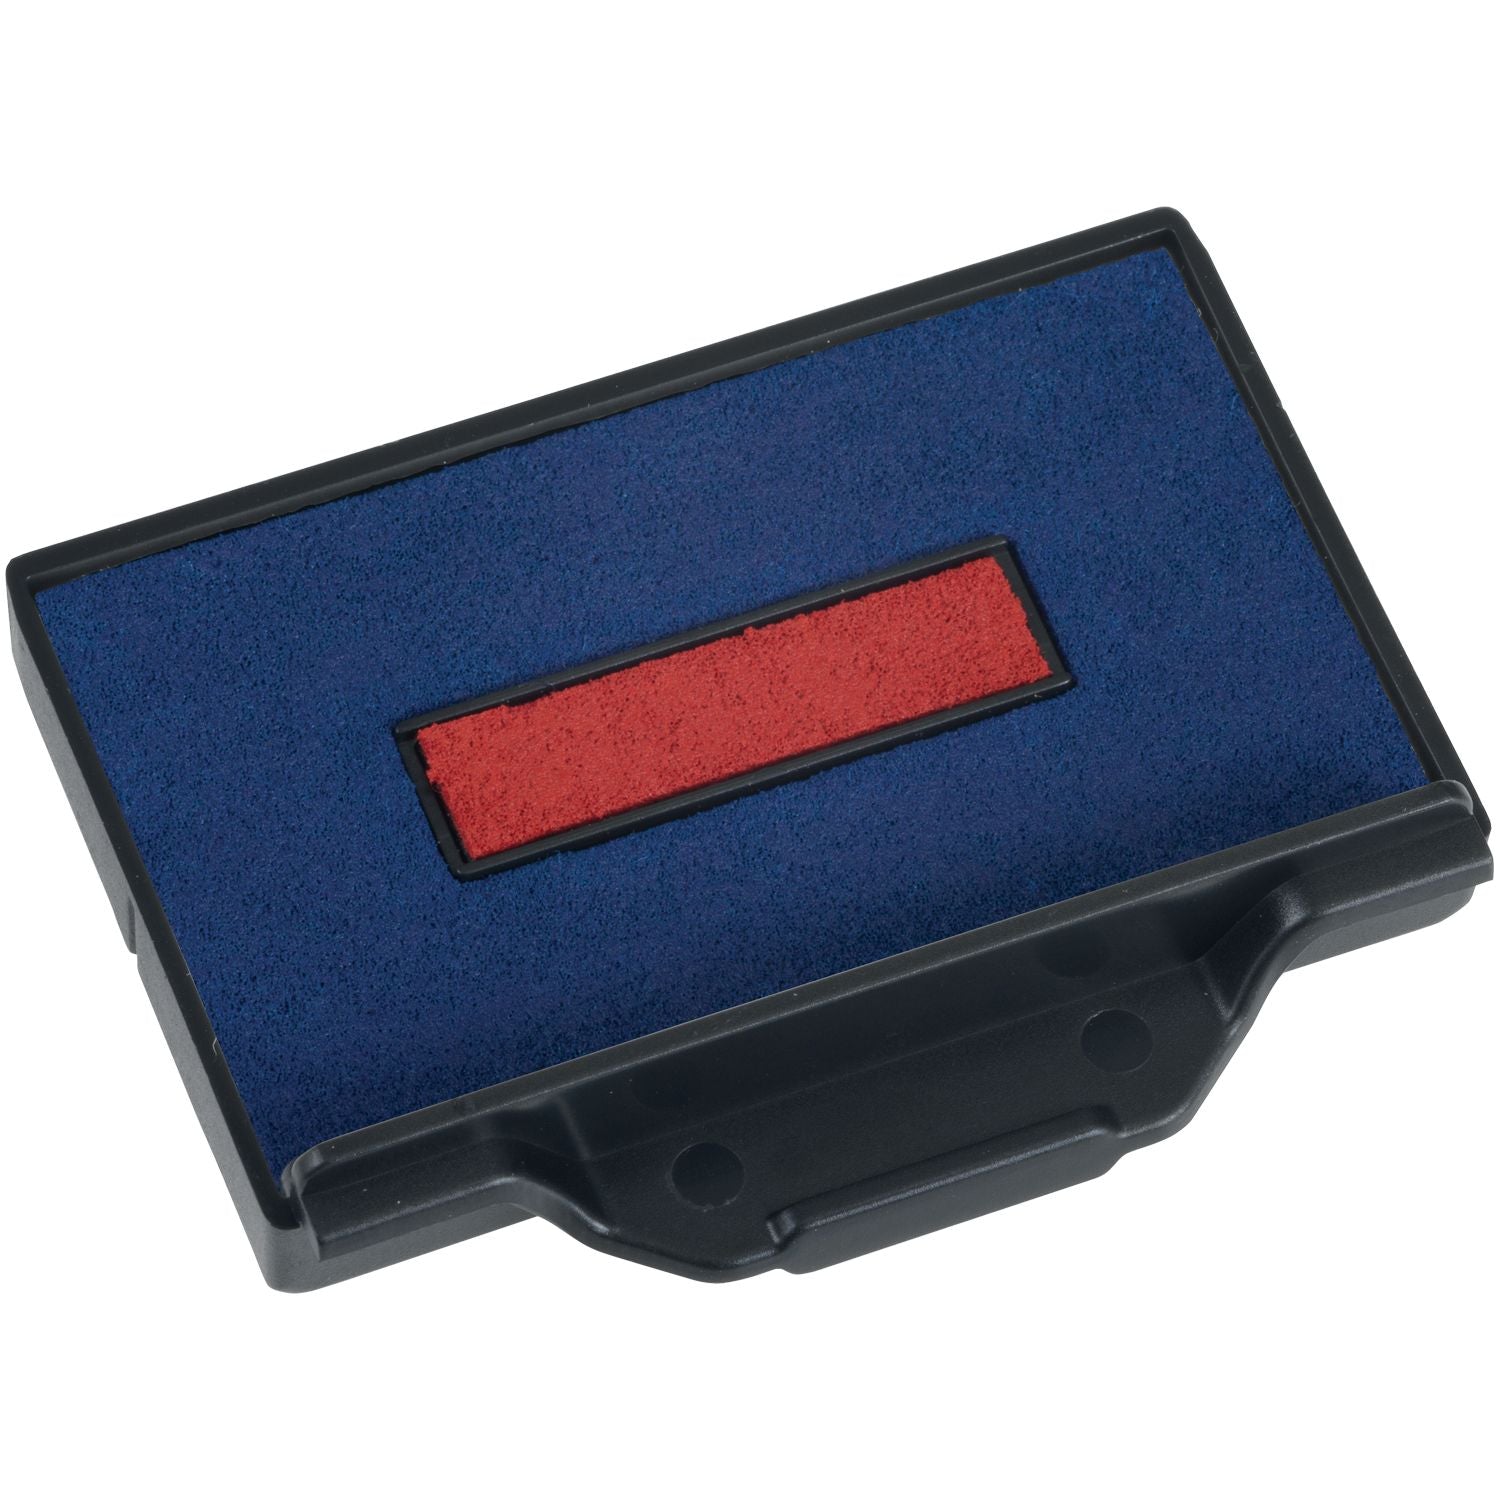 One Color Replacement Ink Pad for HM-6108, E-908, E-918 Stamps